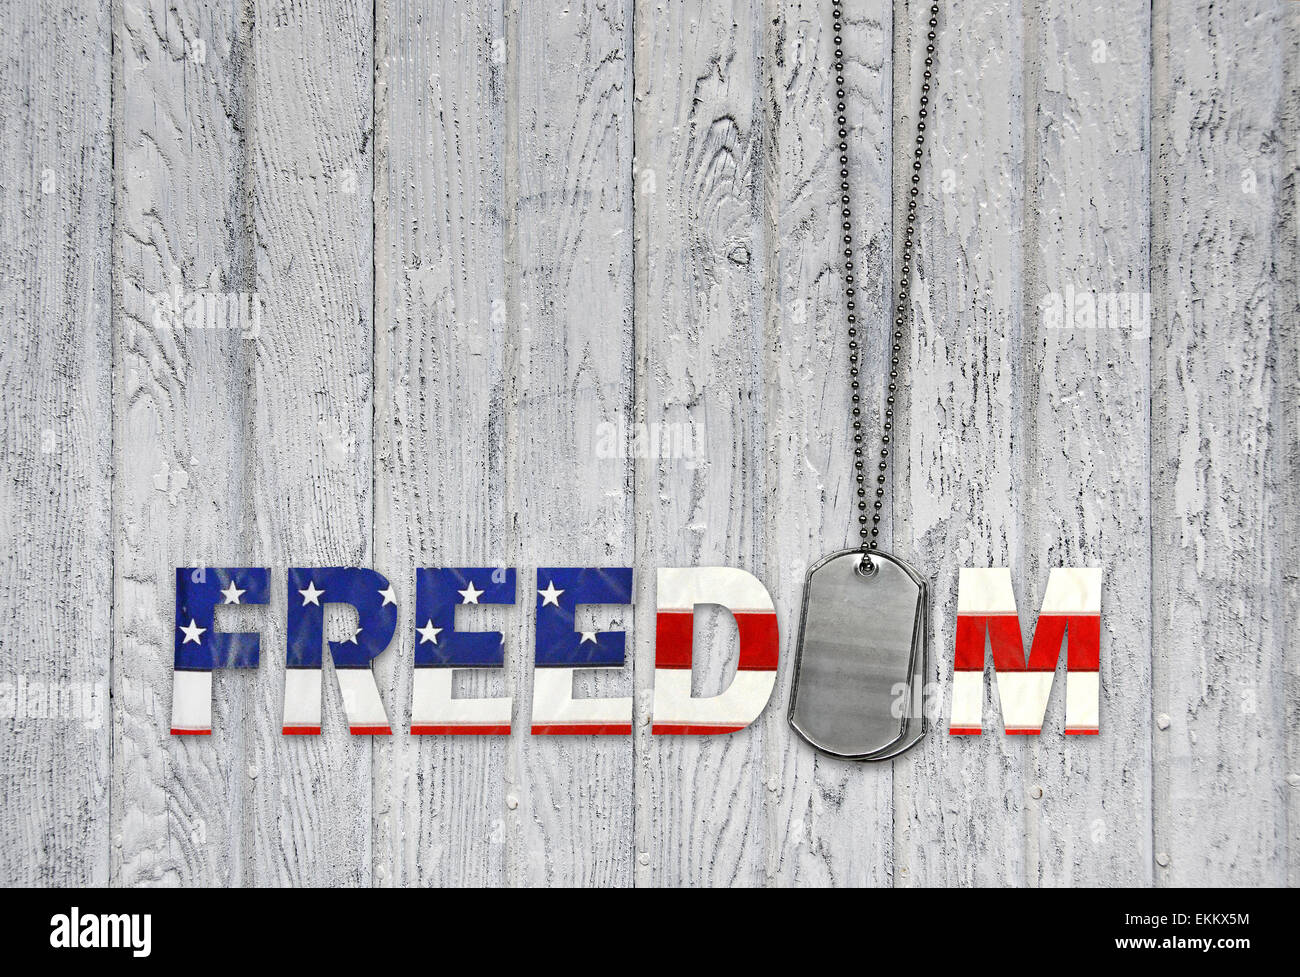 American freedom in flag font with military dog tags on wood. Stock Photo